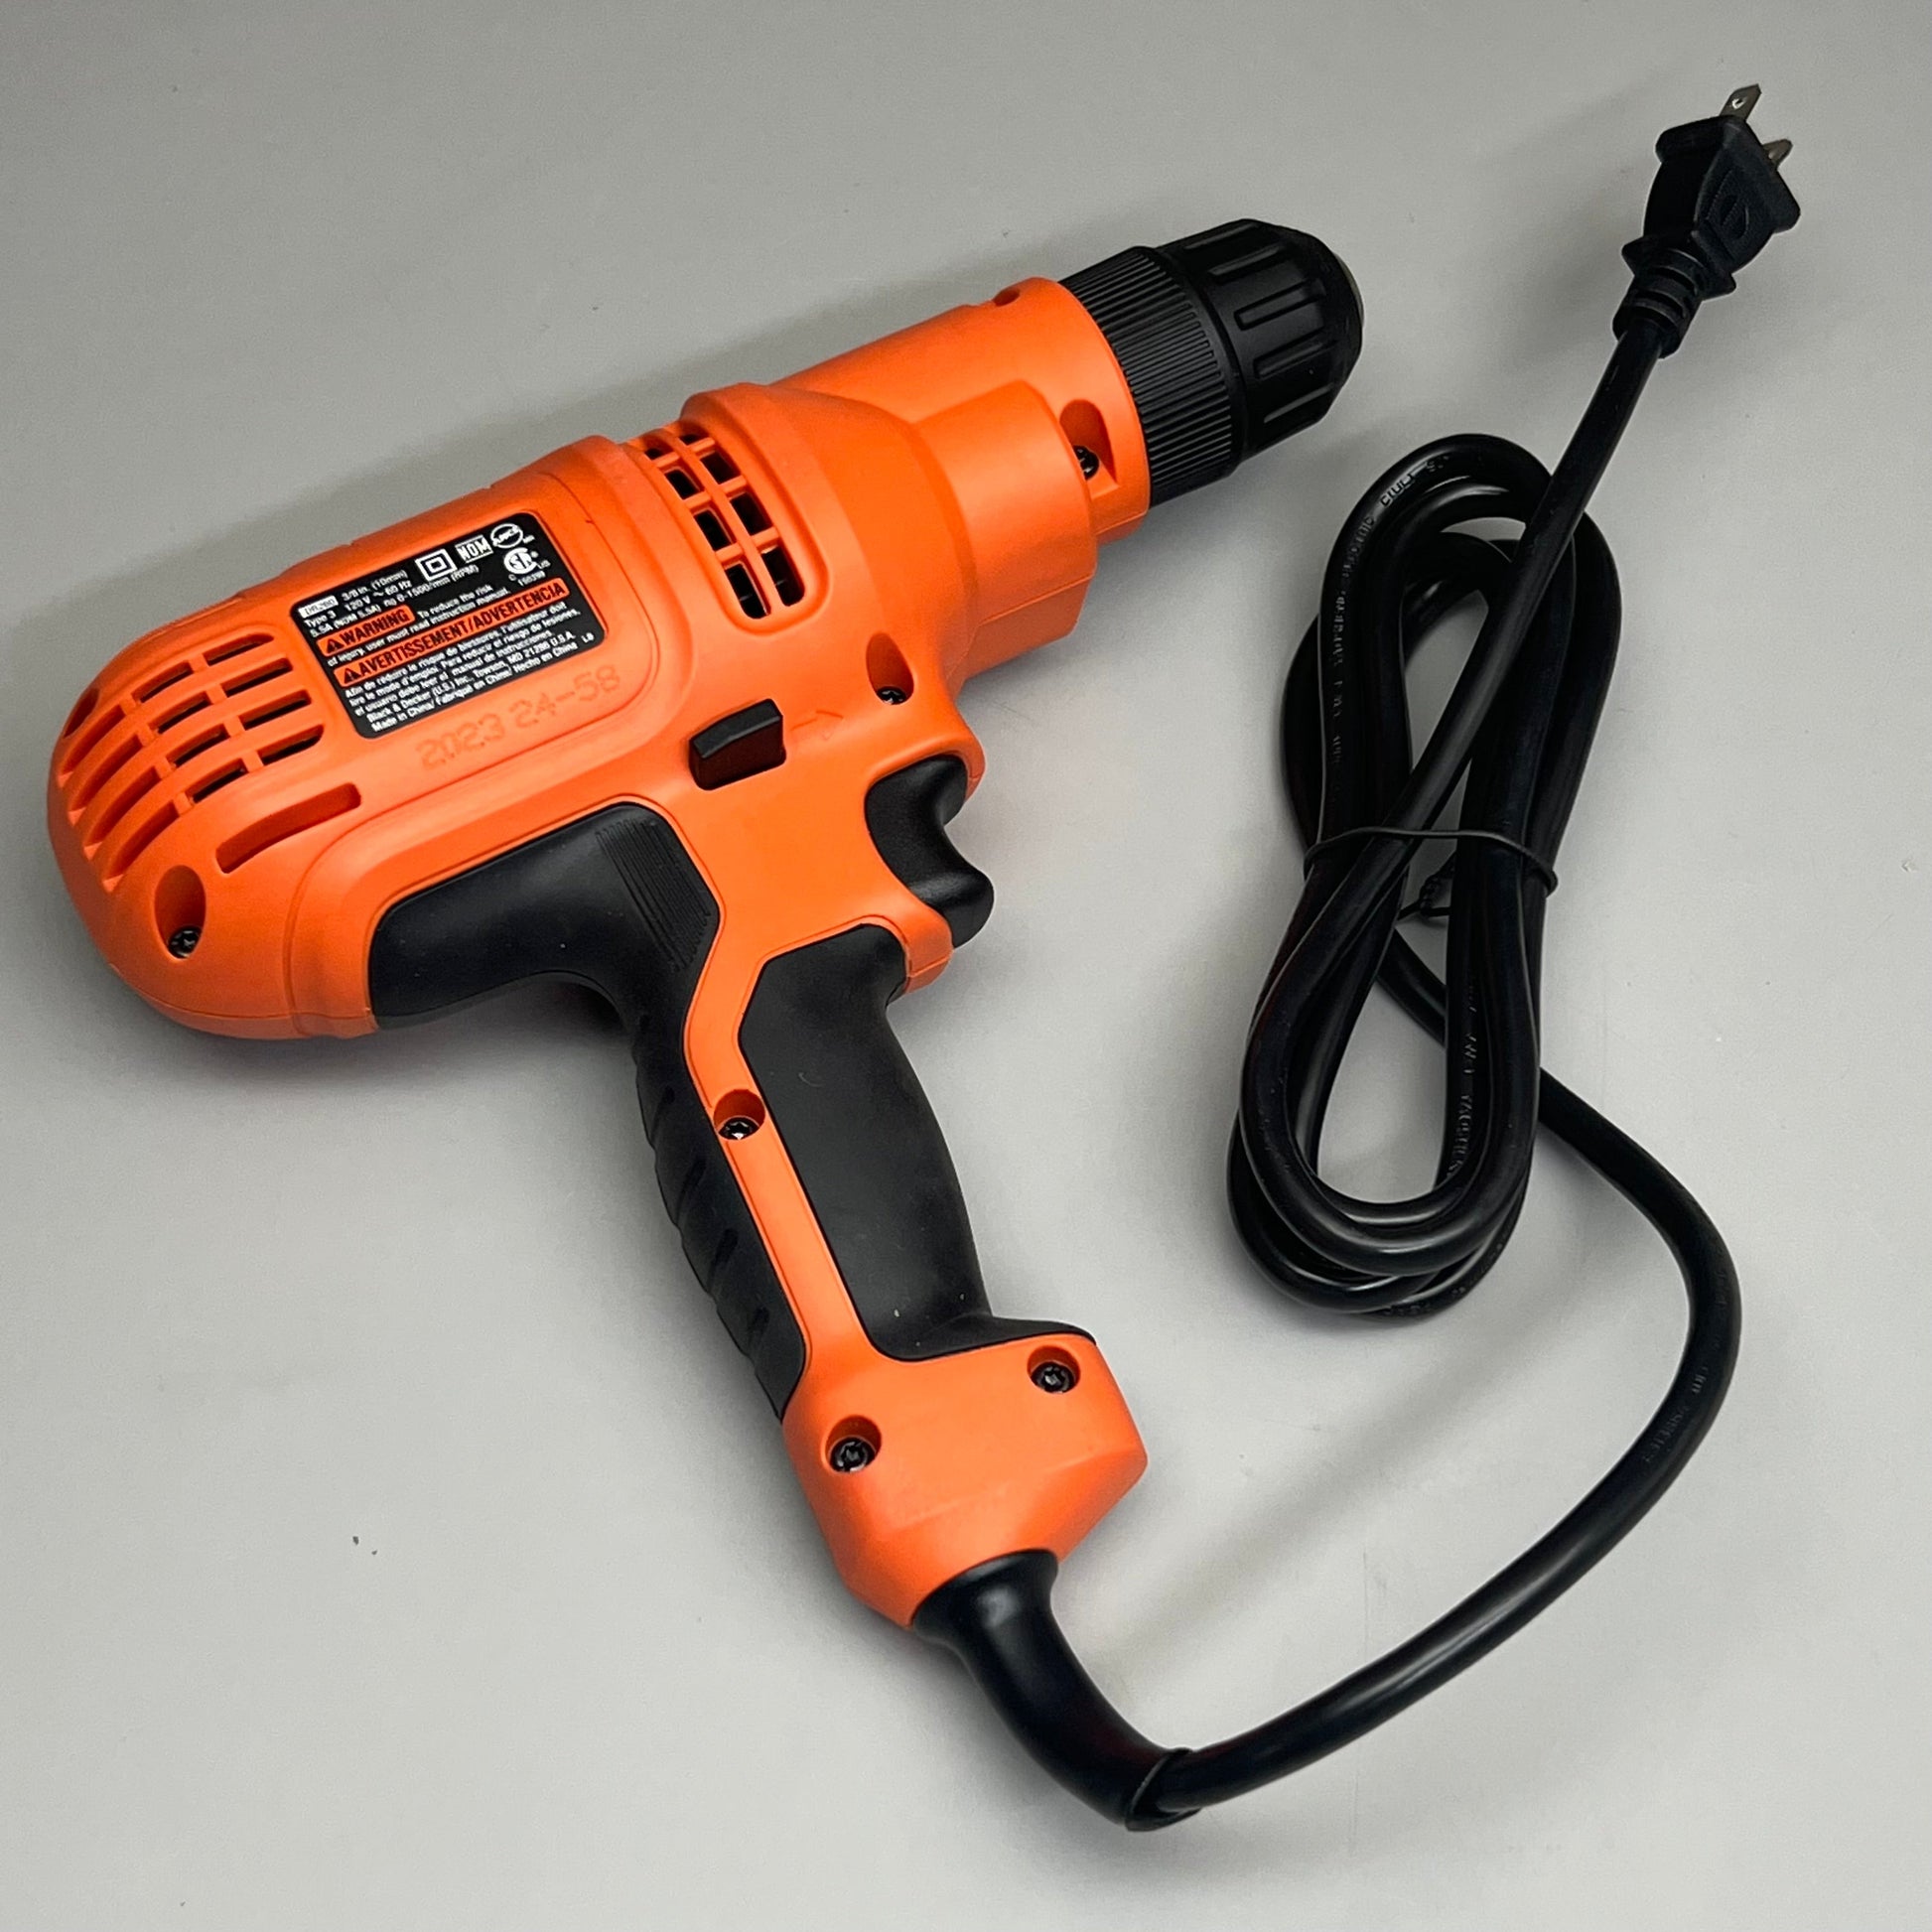 BLACK & DECKER 5.5 Amp Drill / Driver Variable Speed Controlled 3